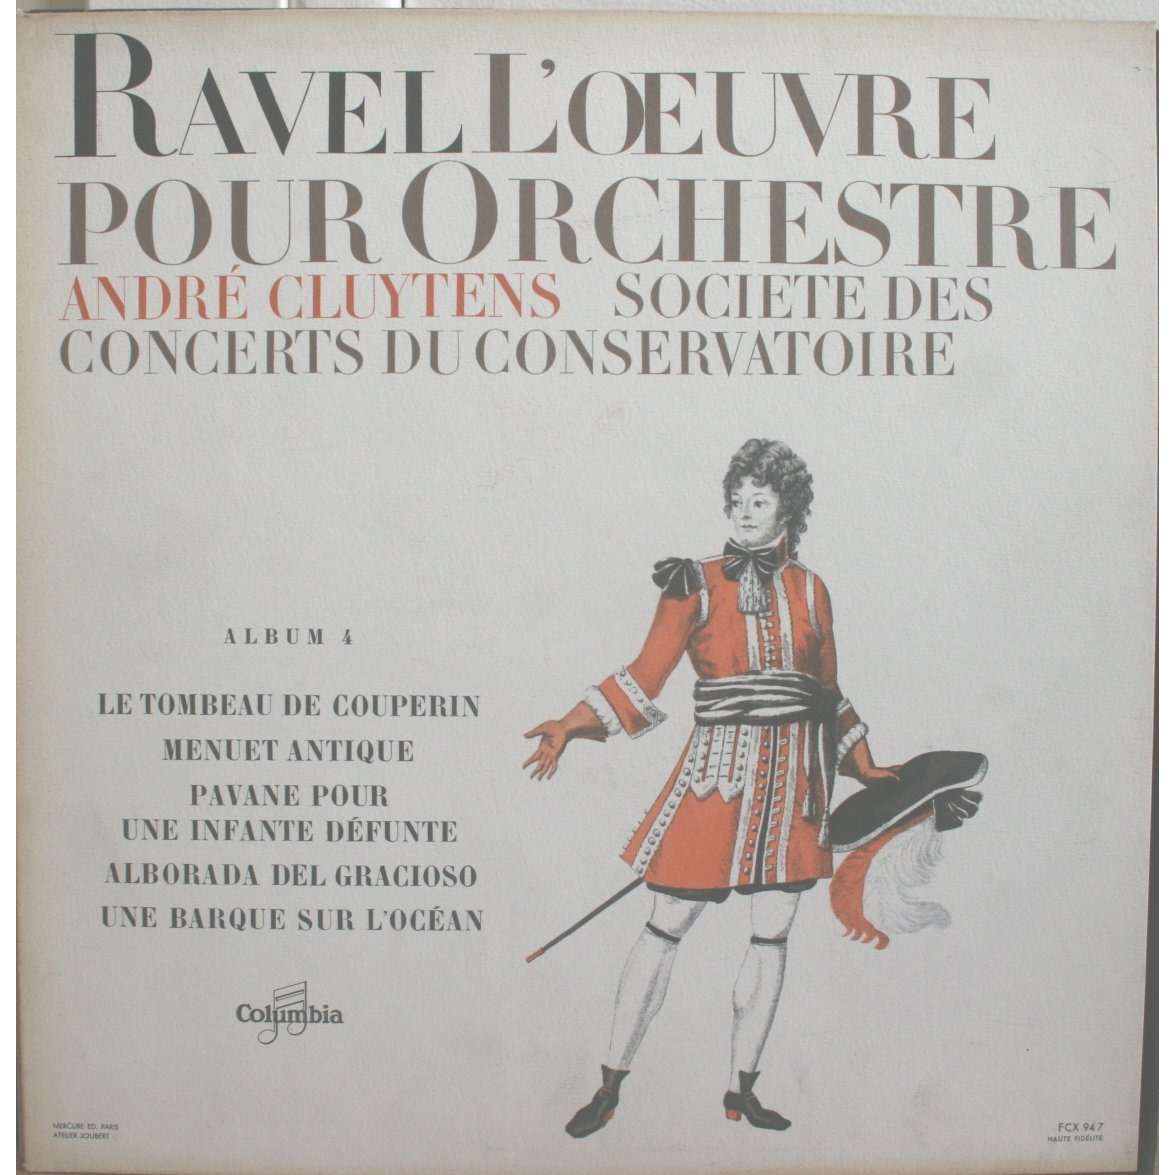 Ravel orchestral works vol °4 by Andre Cluytens, LP with chapoultepek69 ...